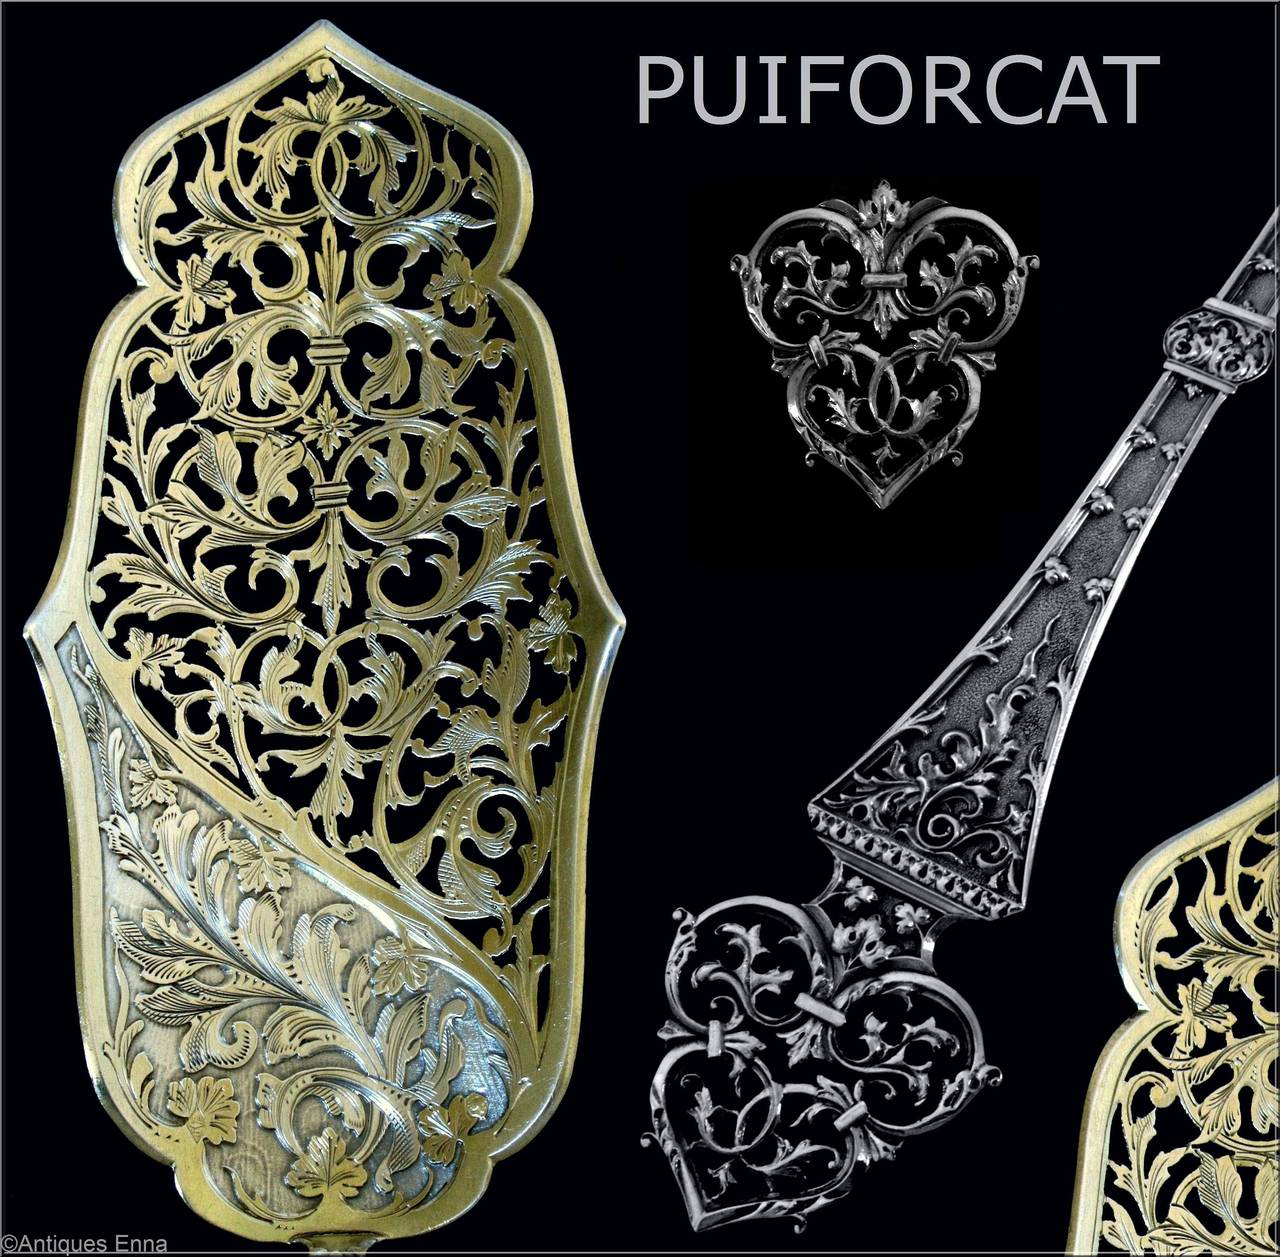 PUIFORCAT Masterpiece French All Sterling Silver Pie/Pastry Server Trilobé

Head of Minerve 1 st titre for 950/1000 French Sterling Silver Vermeil guarantee

A piece of truly exceptional quality, for the richness of its decoration, its form and